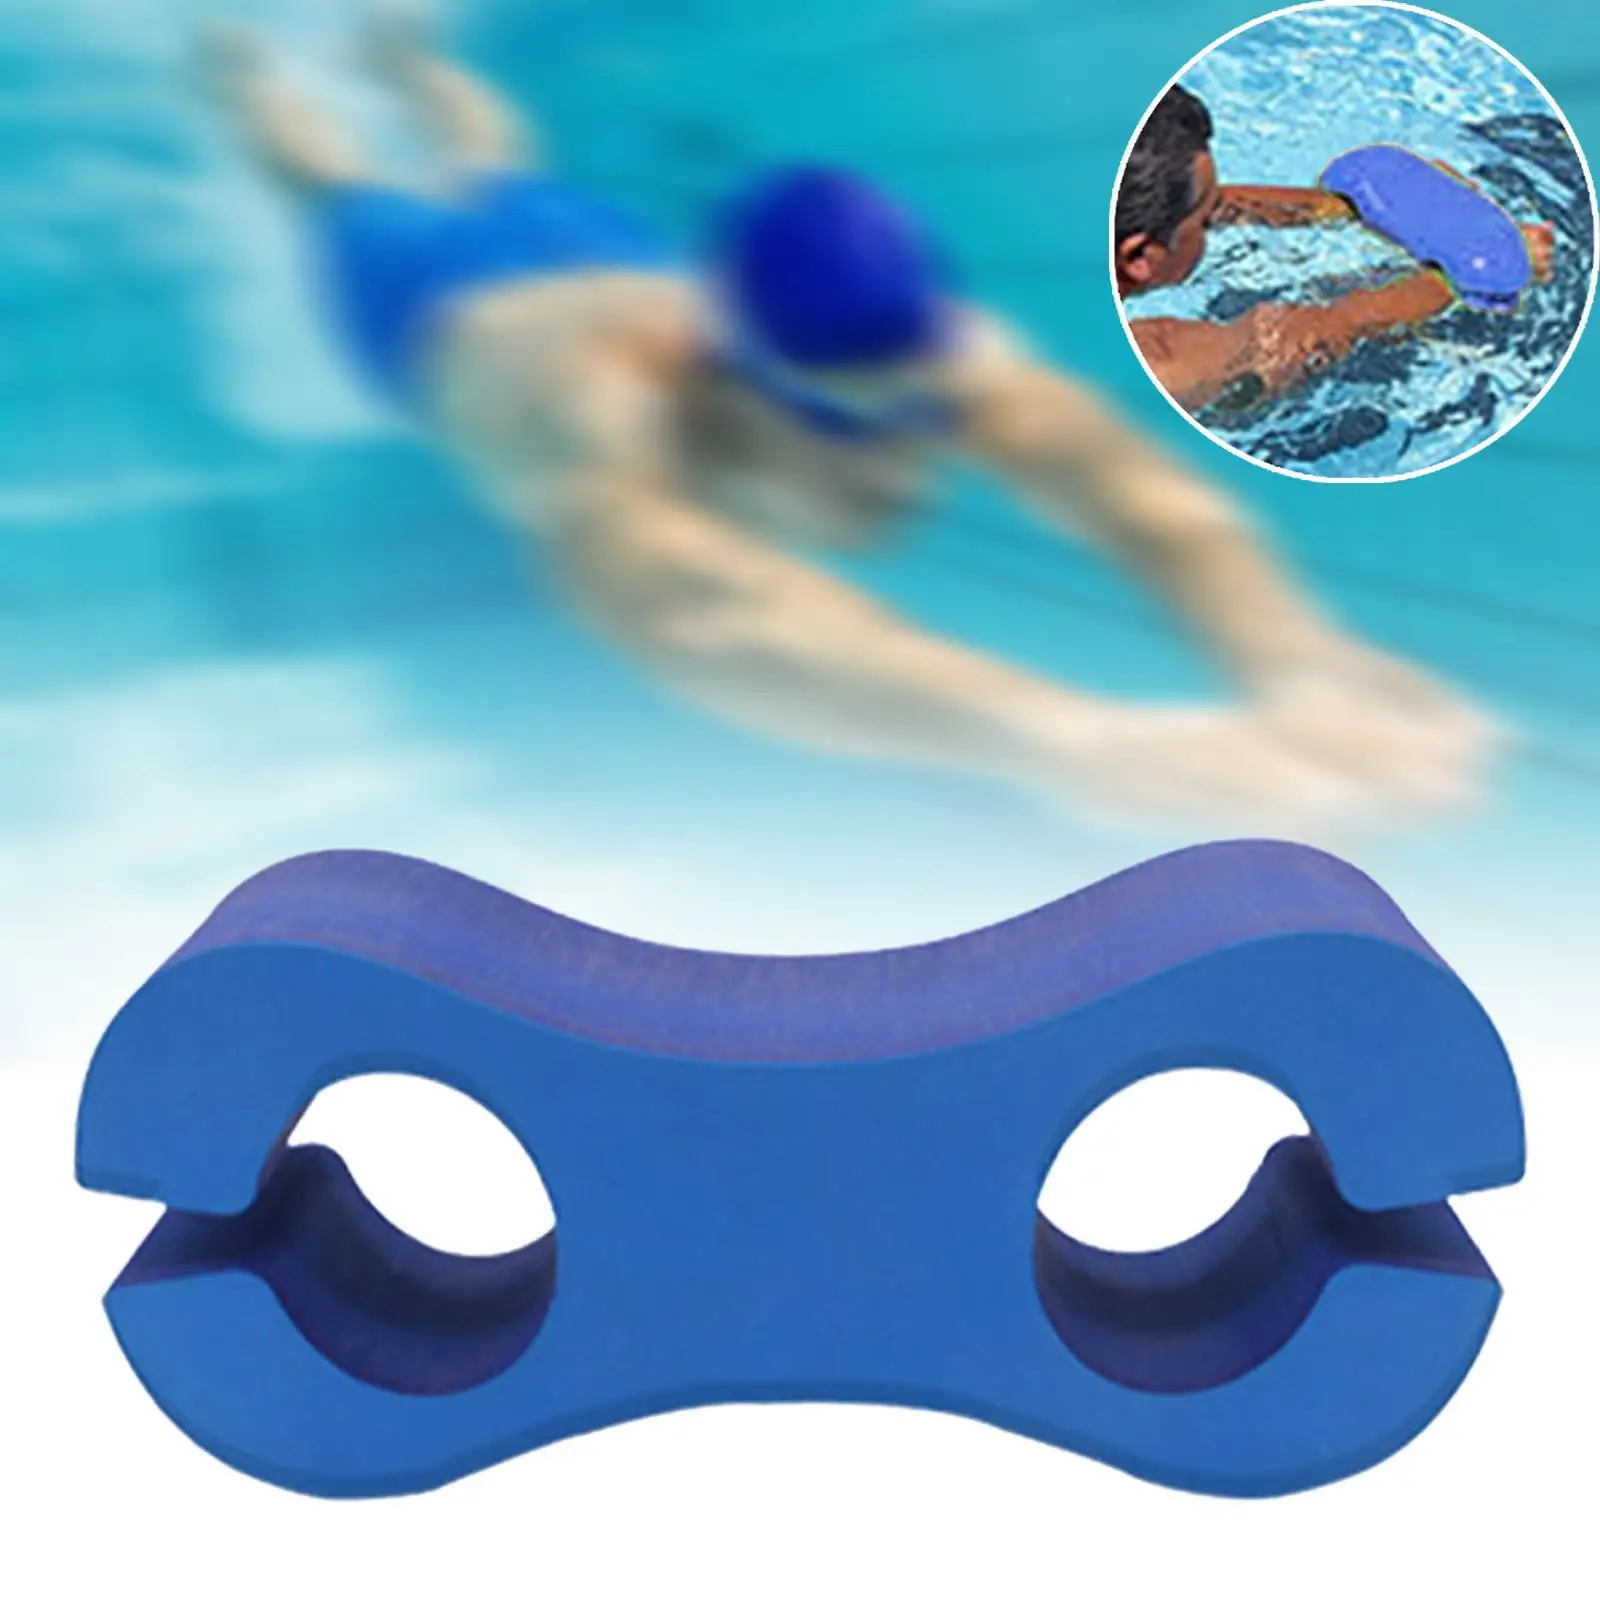 Pull Buoy Float Buoyancy Legs and Hips Support for Pool Gear Aquatic Fitness